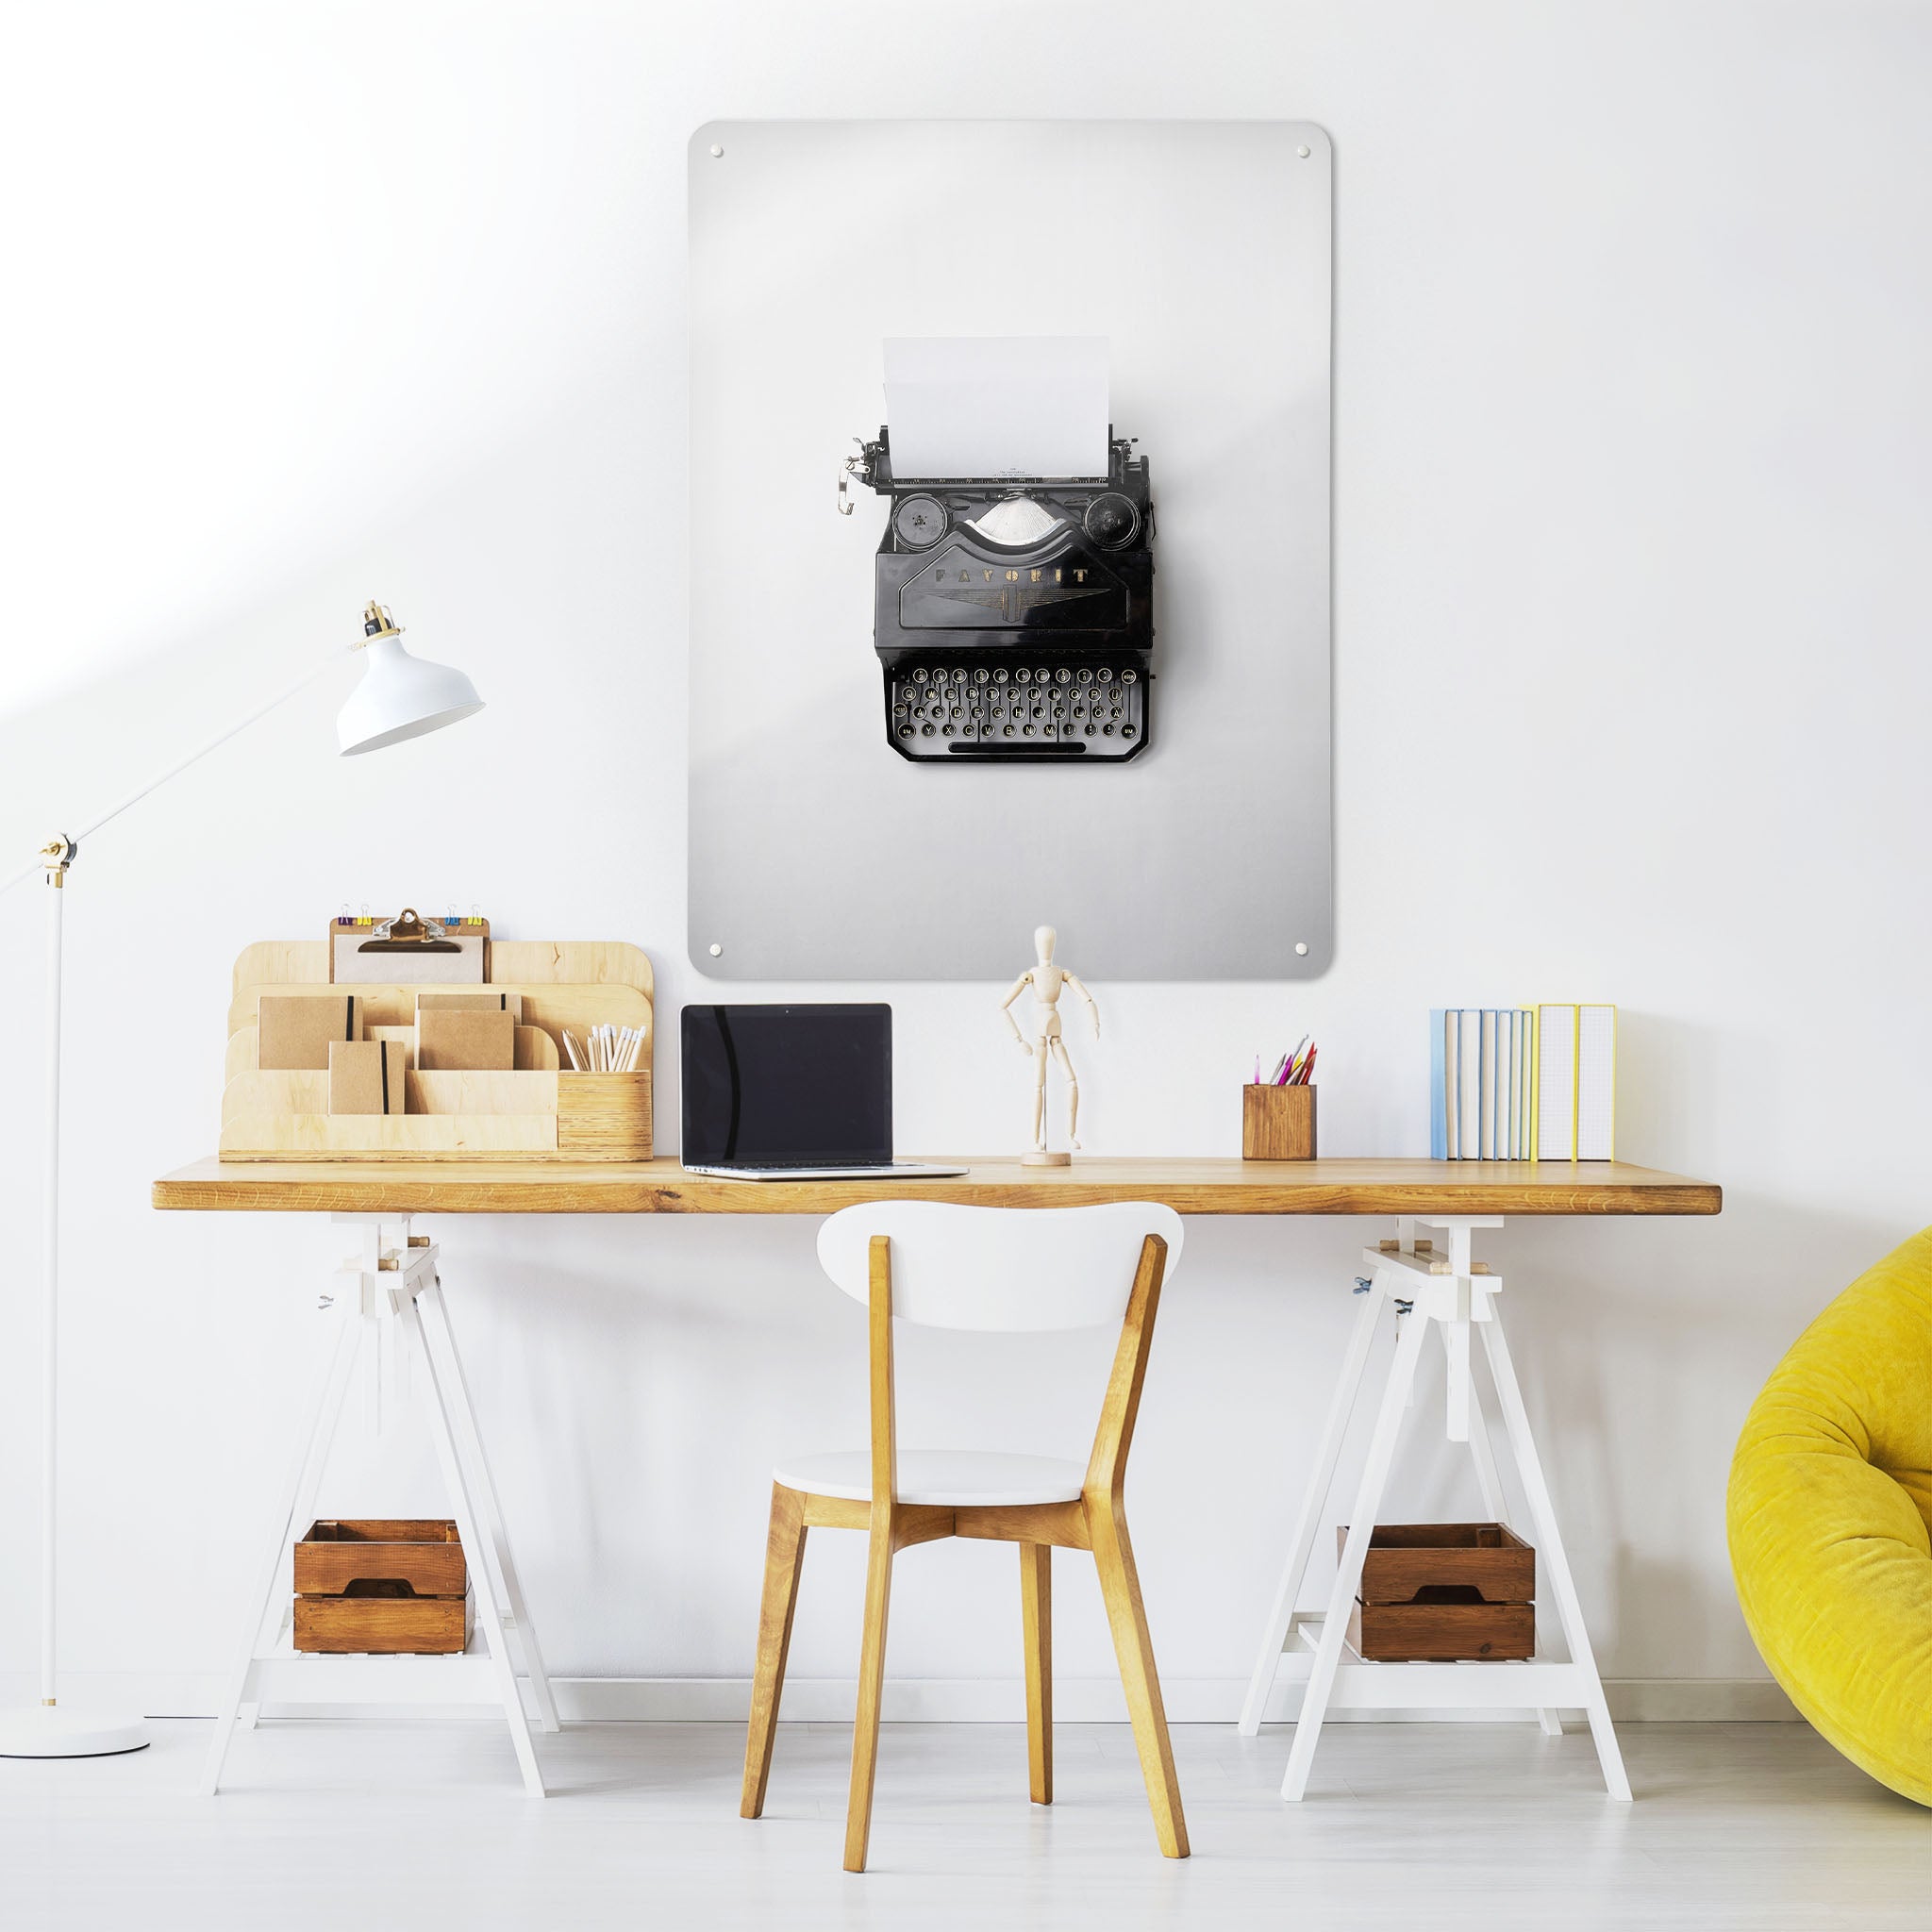 A desk in a workspace setting in a white interior with a magnetic metal wall art panel showing a photograph of a bird's eye view of a vintage typewriter on a white background